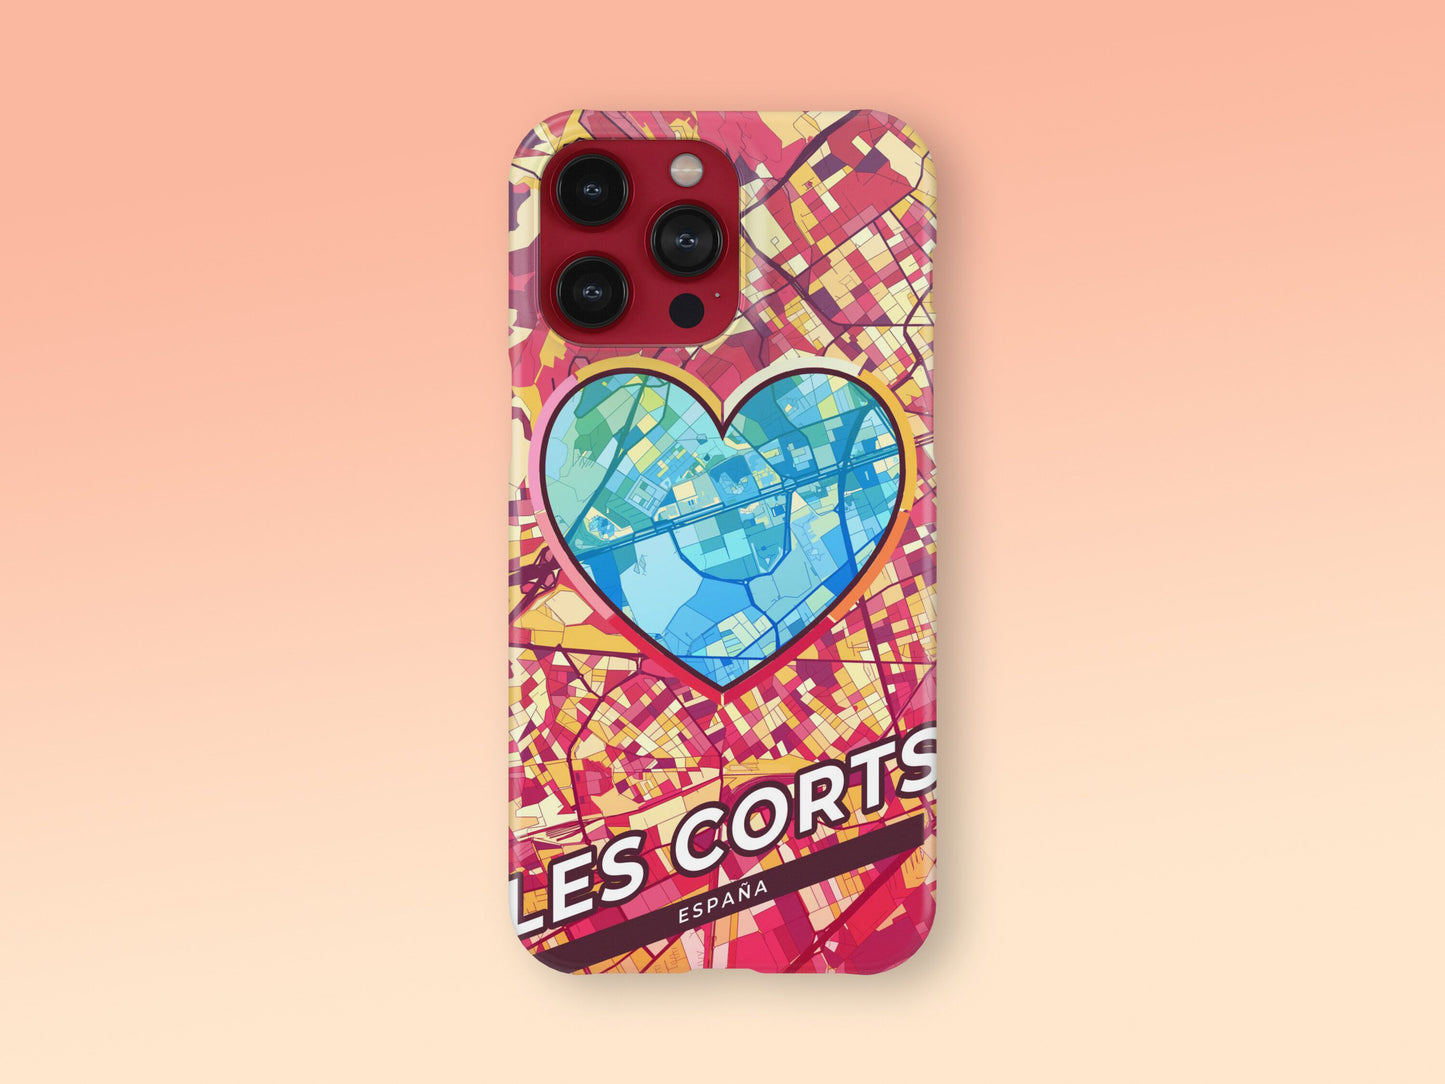 Les Corts Spain slim phone case with colorful icon. Birthday, wedding or housewarming gift. Couple match cases. 2